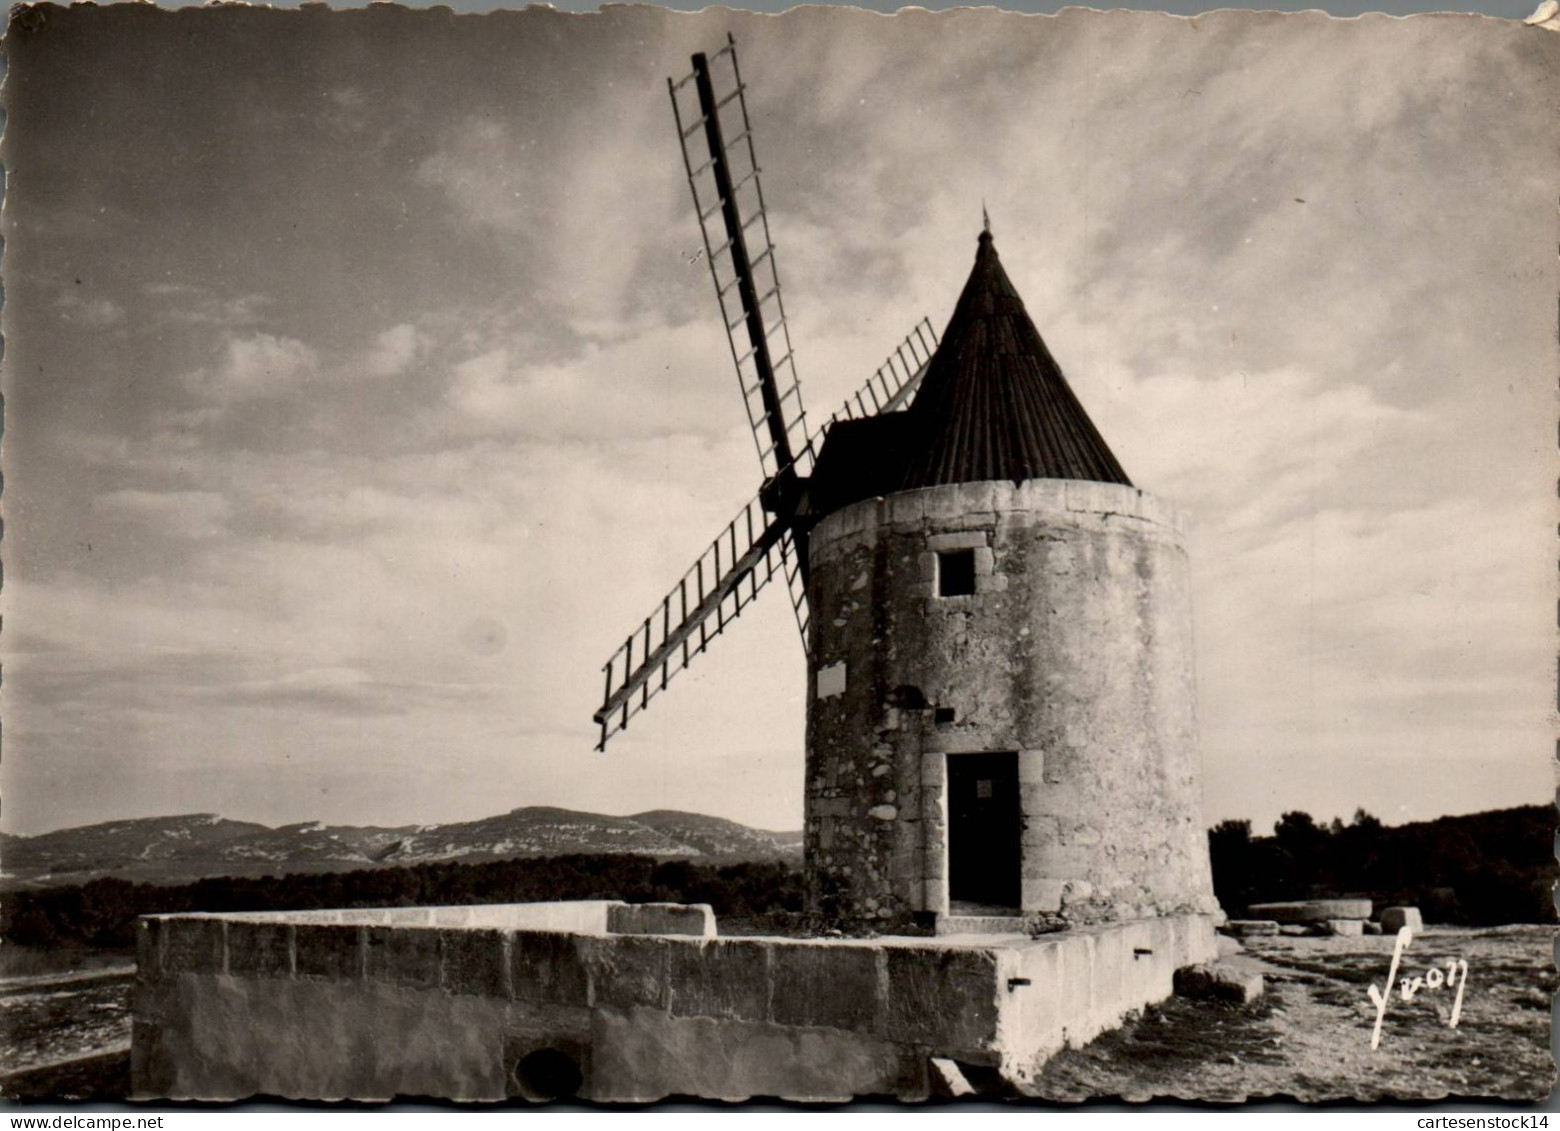 N°1989 W -cpsm Fontvieille -le Moulin- - Windmills